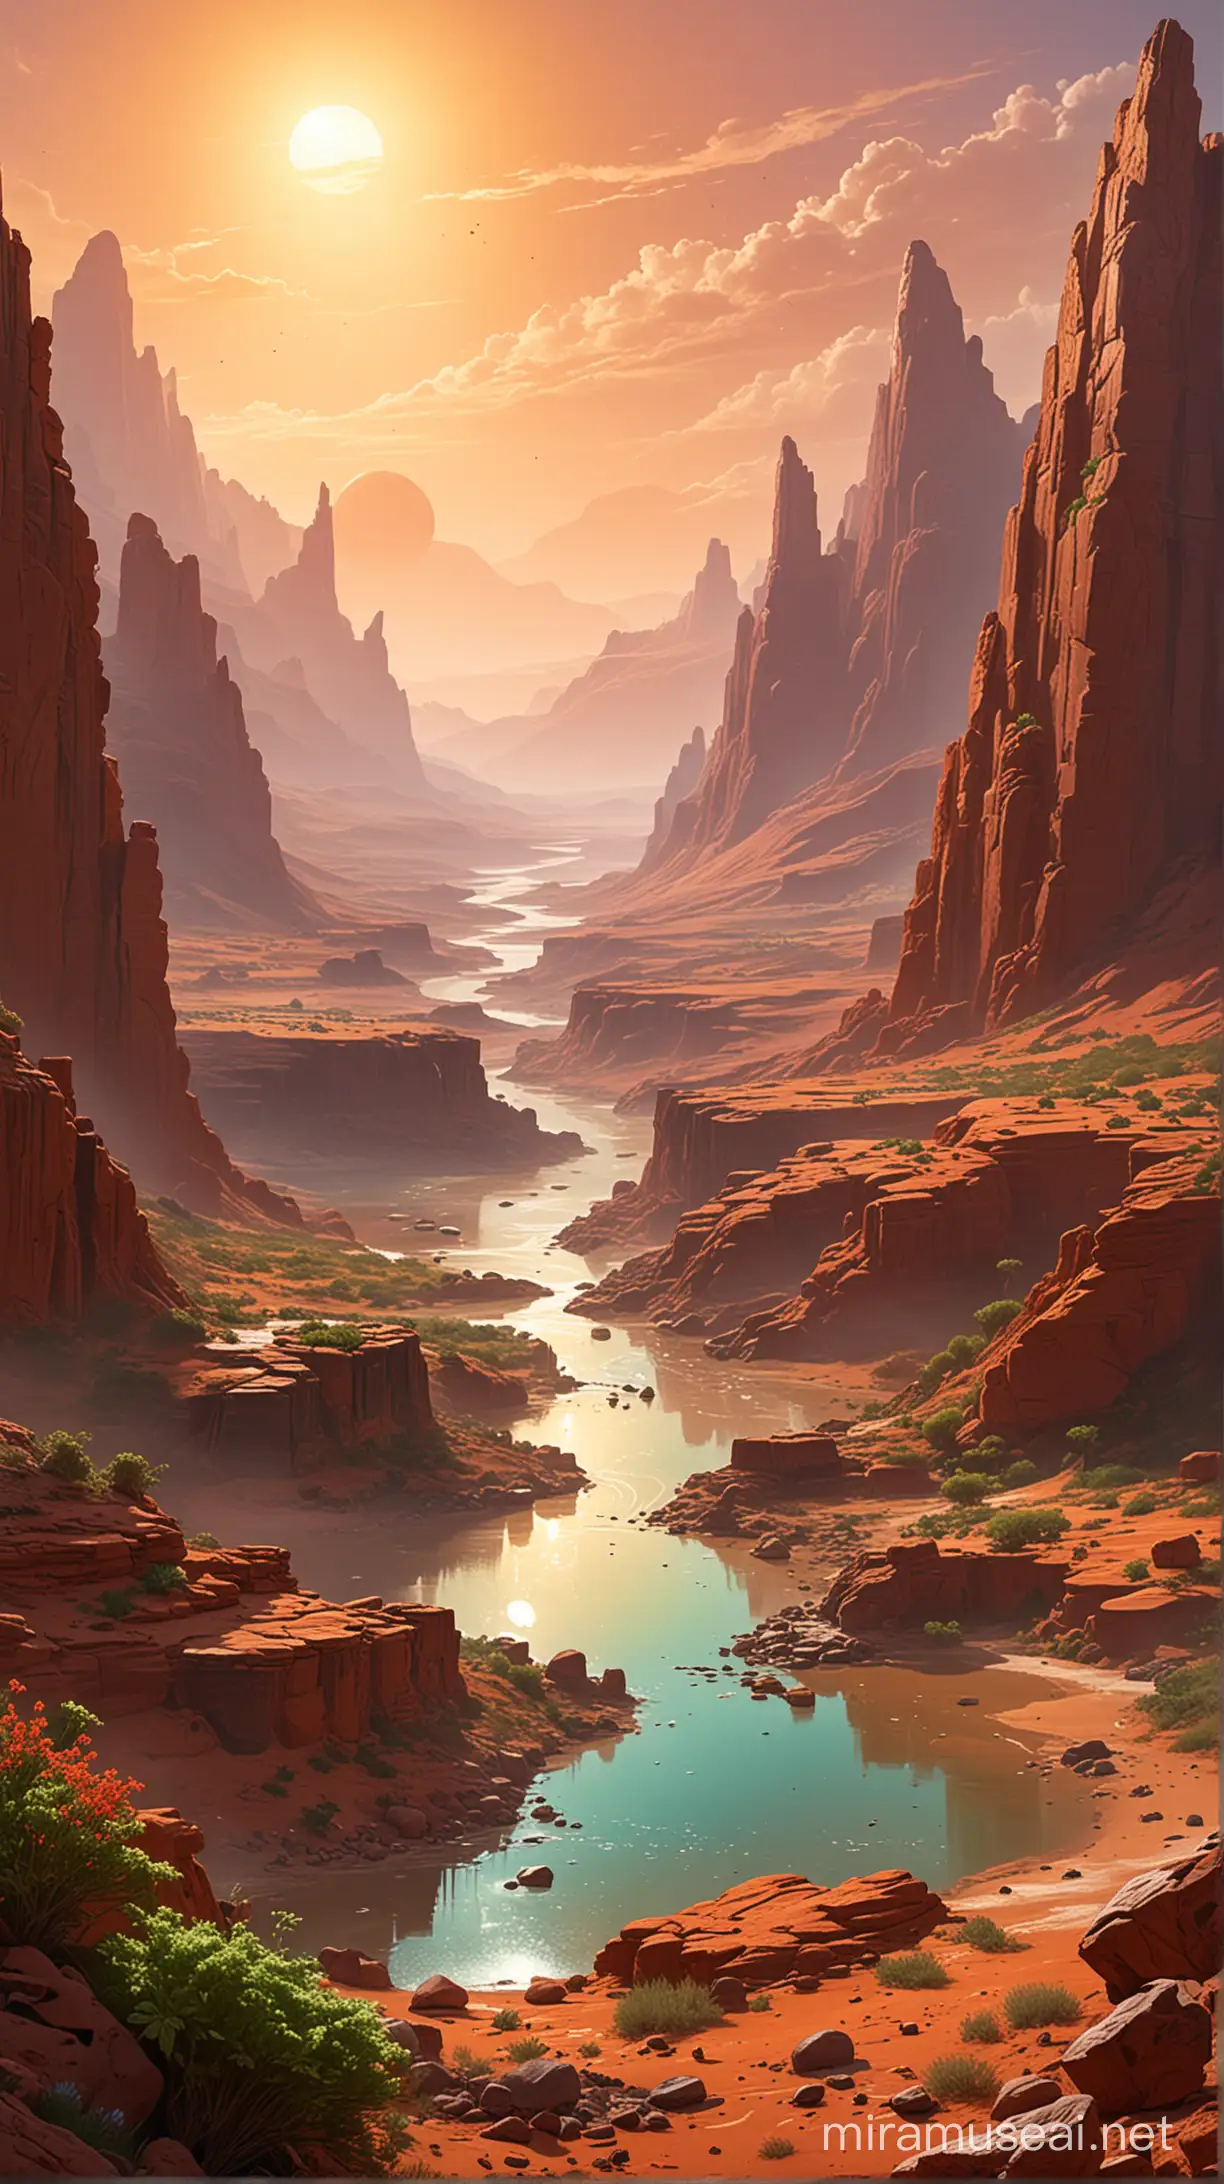 A lush, vibrant landscape painting of ancient Mars, teeming with plant and animal life under a warm sun.  Waterways flow through valleys, and advanced Martian cities rise in the distance.
